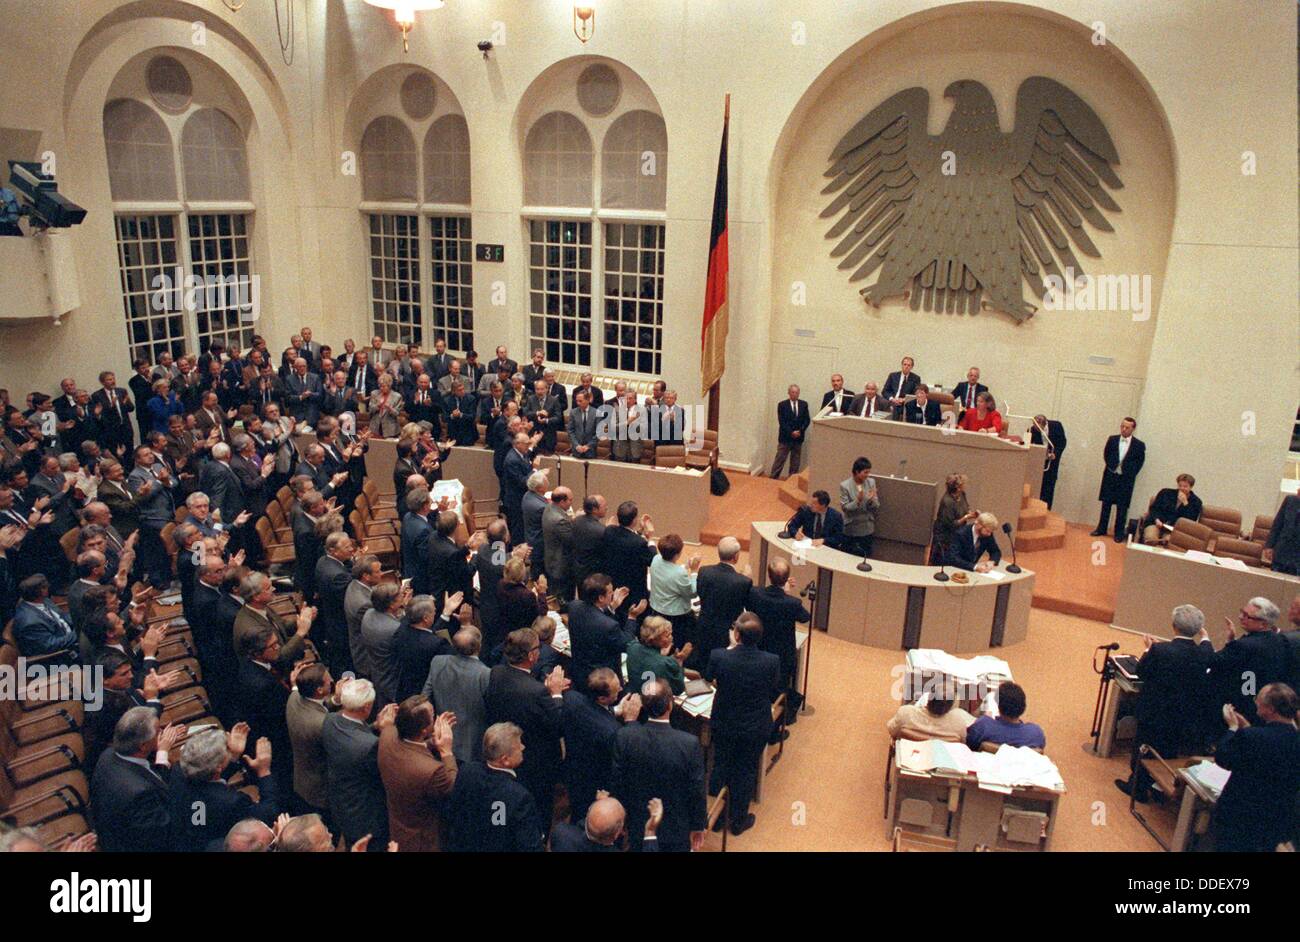 Members of the Bundestag stand up and sing the national anthem after the speaker announced the positive result of the vote on the unification treaty in Bonn, Germany, 20 September 1990. The same day GDR 'Volkskammer' (Parliament) in Berlin voted in favour of the treaty with a two-thirds majority as well. The results of the vote in detail: Bundestag (vote by name): 442 mps voted in favour, 47 against the treaty, three abstained from voteing. GDR Volkskammer: 299 mps voted in favour, 80 against the treaty and one abstained from voting. Stock Photo